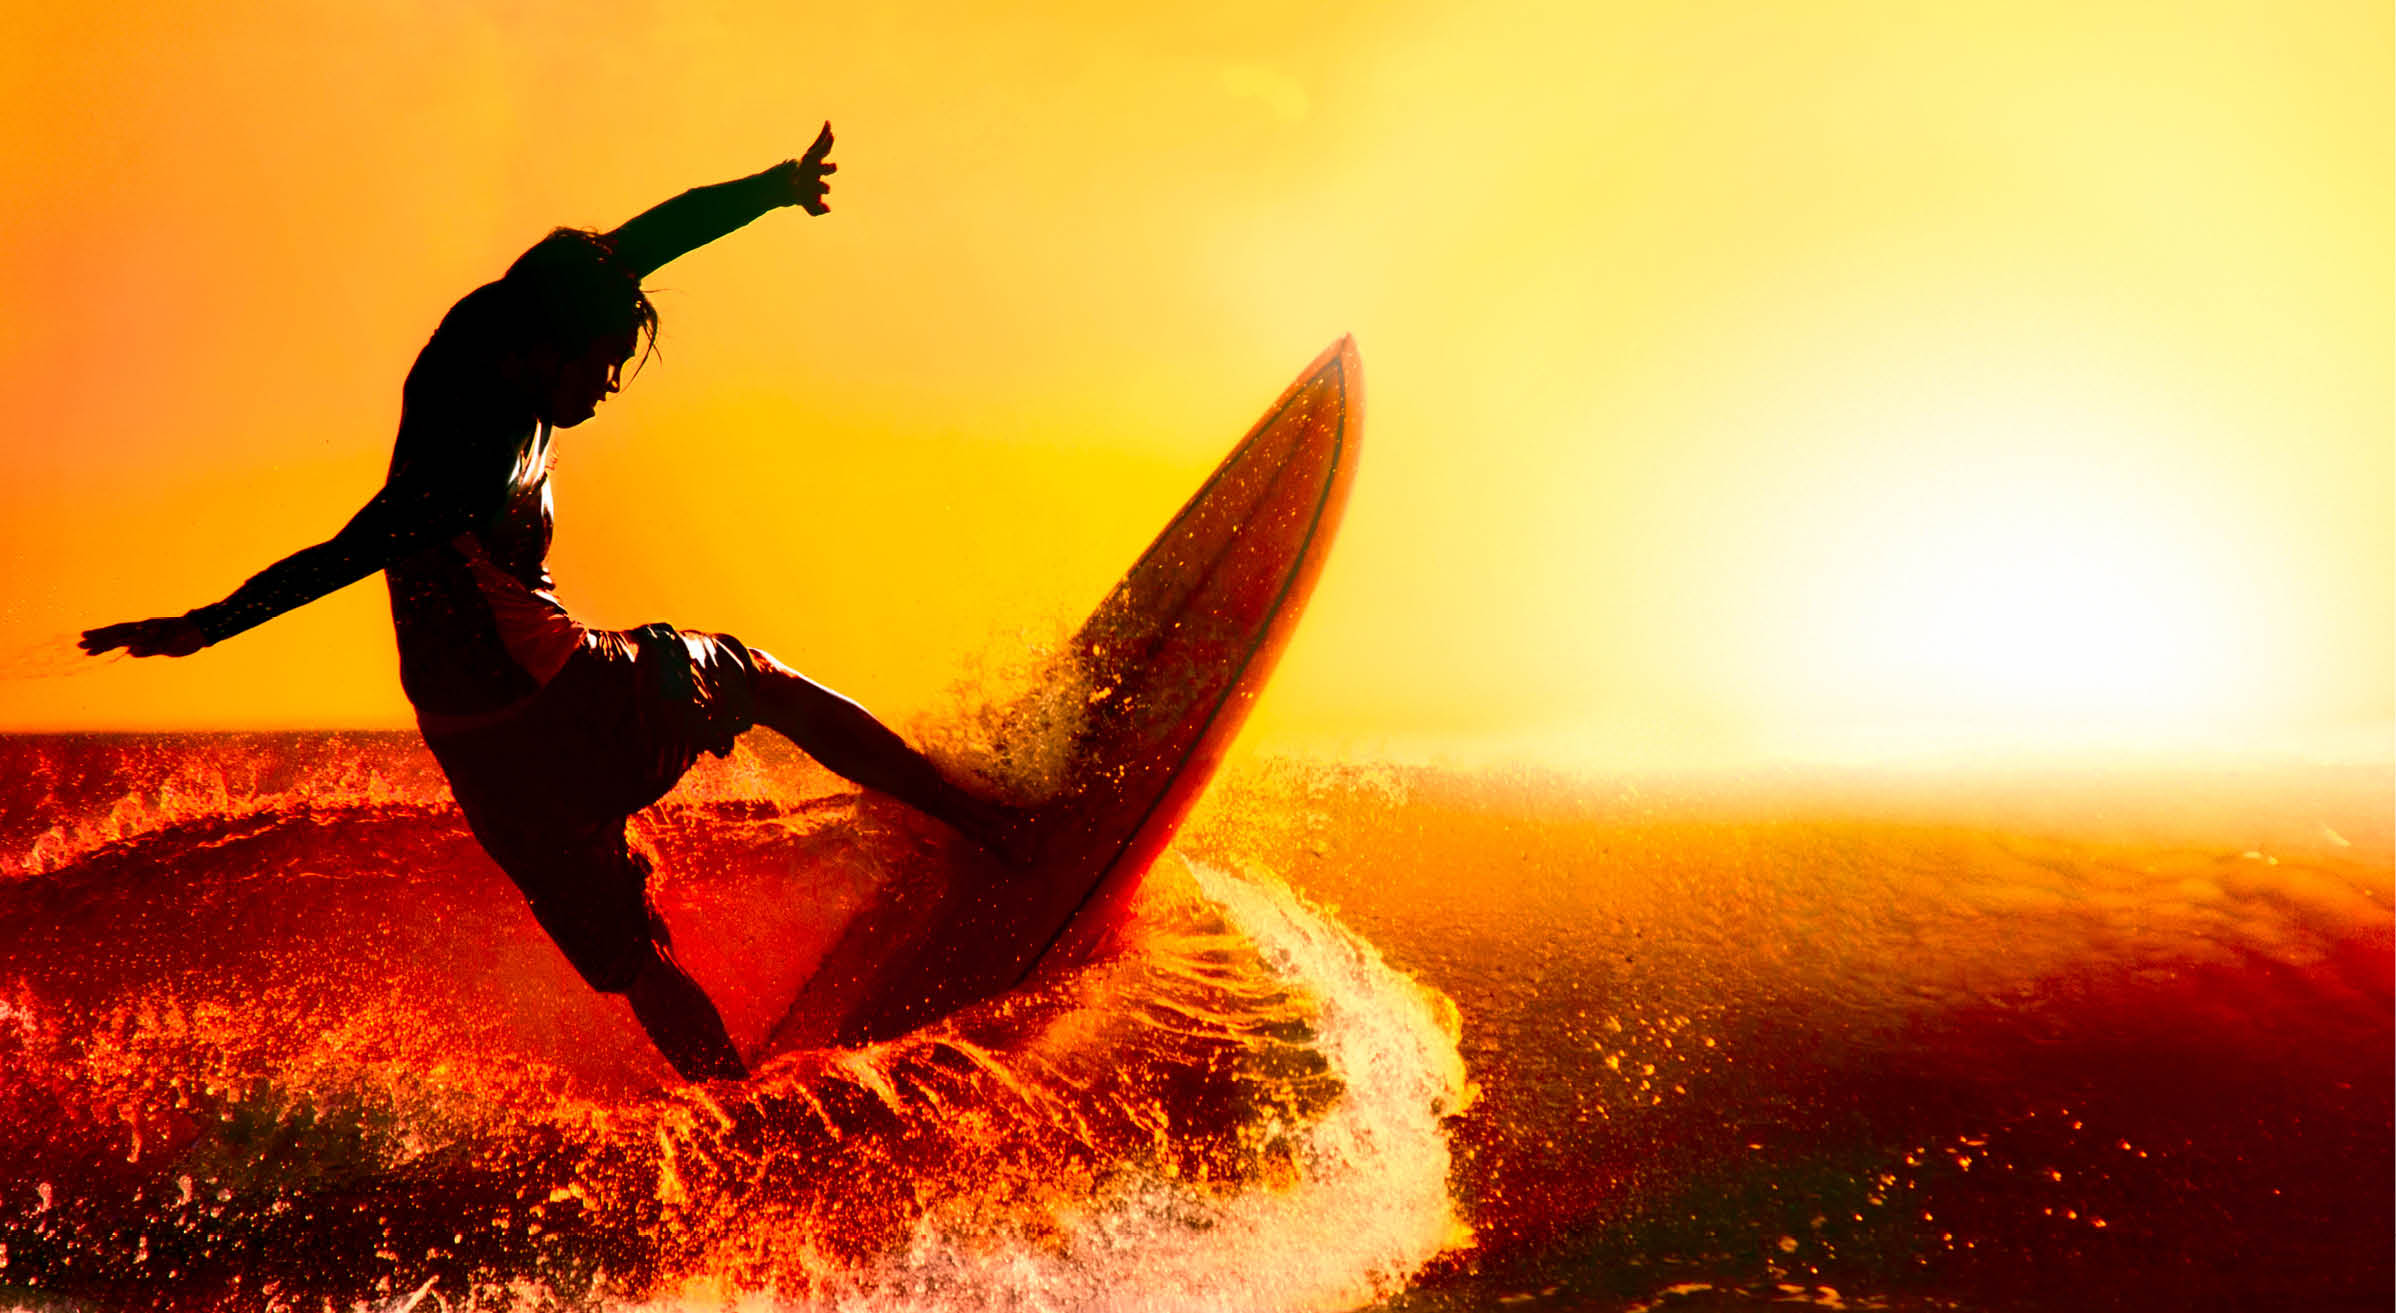 Master surf. Artistic post production.